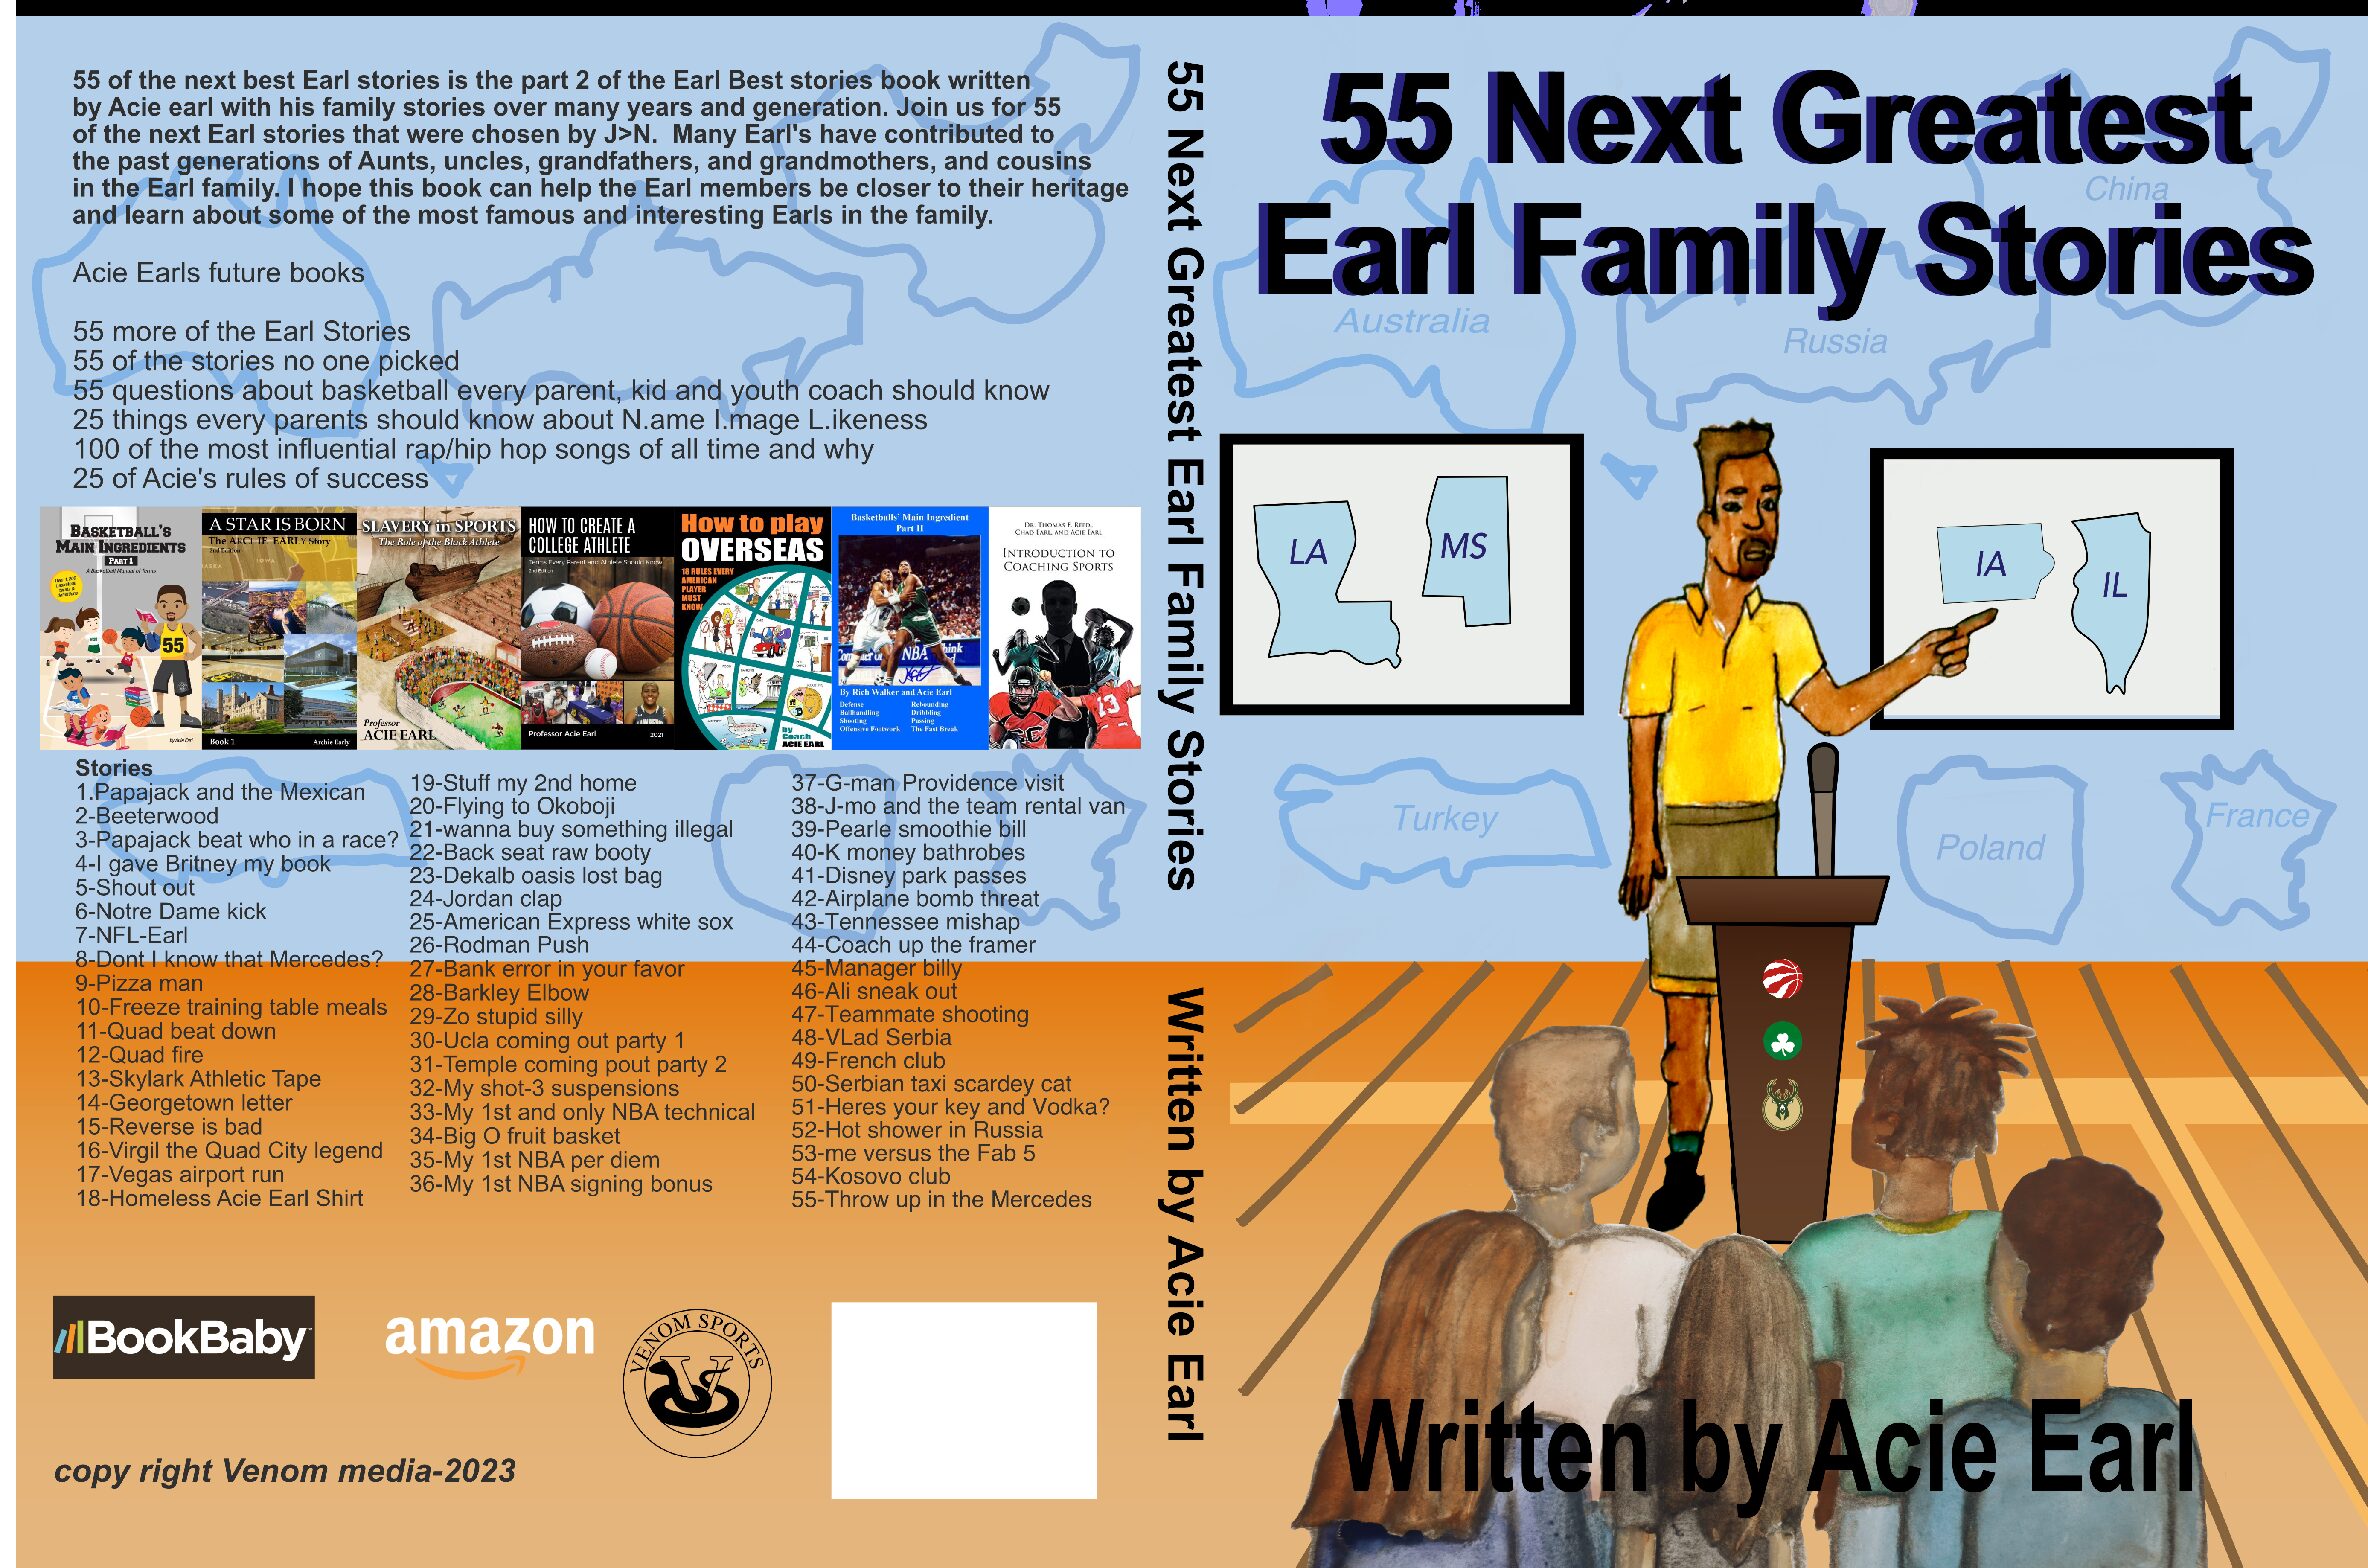 55 Next Greatest Earl Family Stories